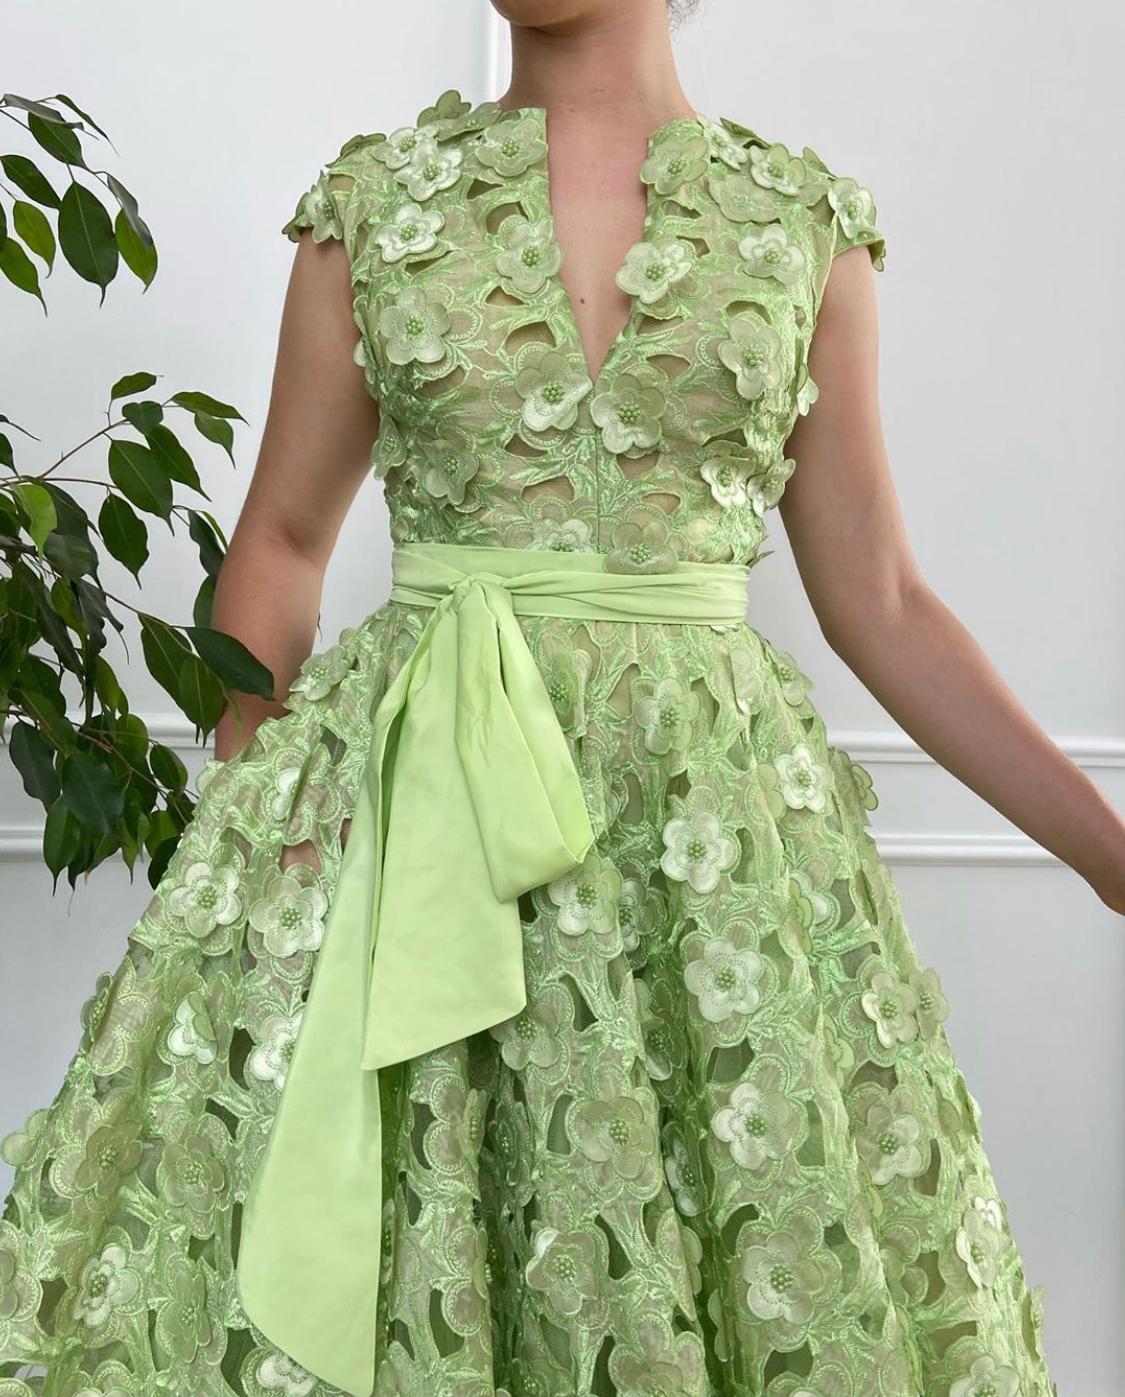 Green A-Line dress with no sleeves and embroidery